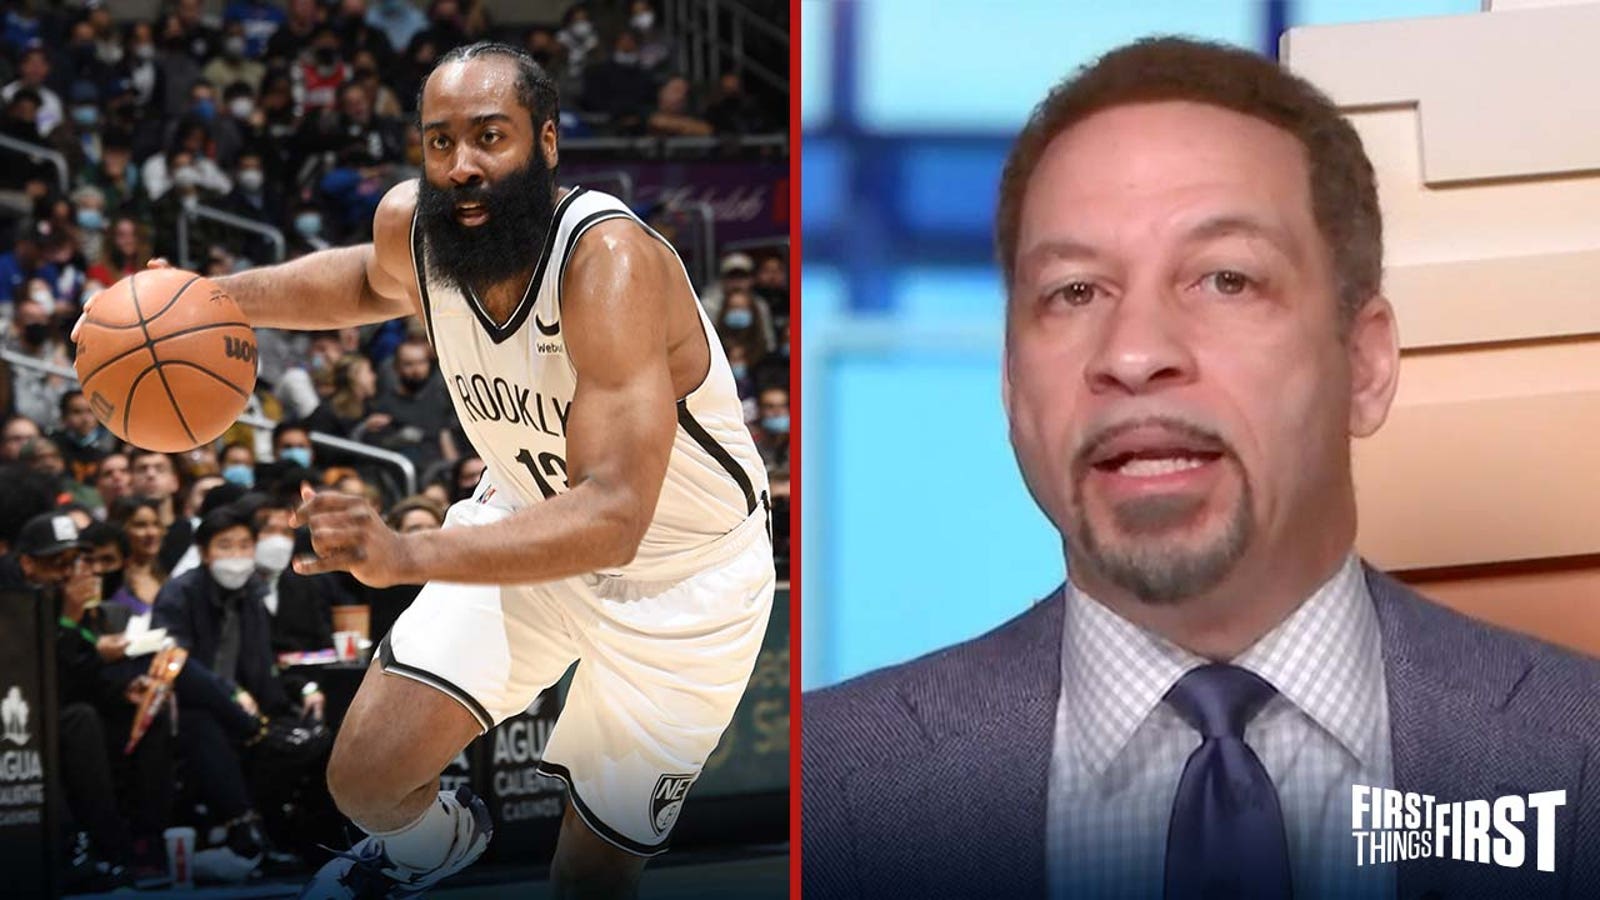 Chris Broussard: I'm not ready to say James Harden is back